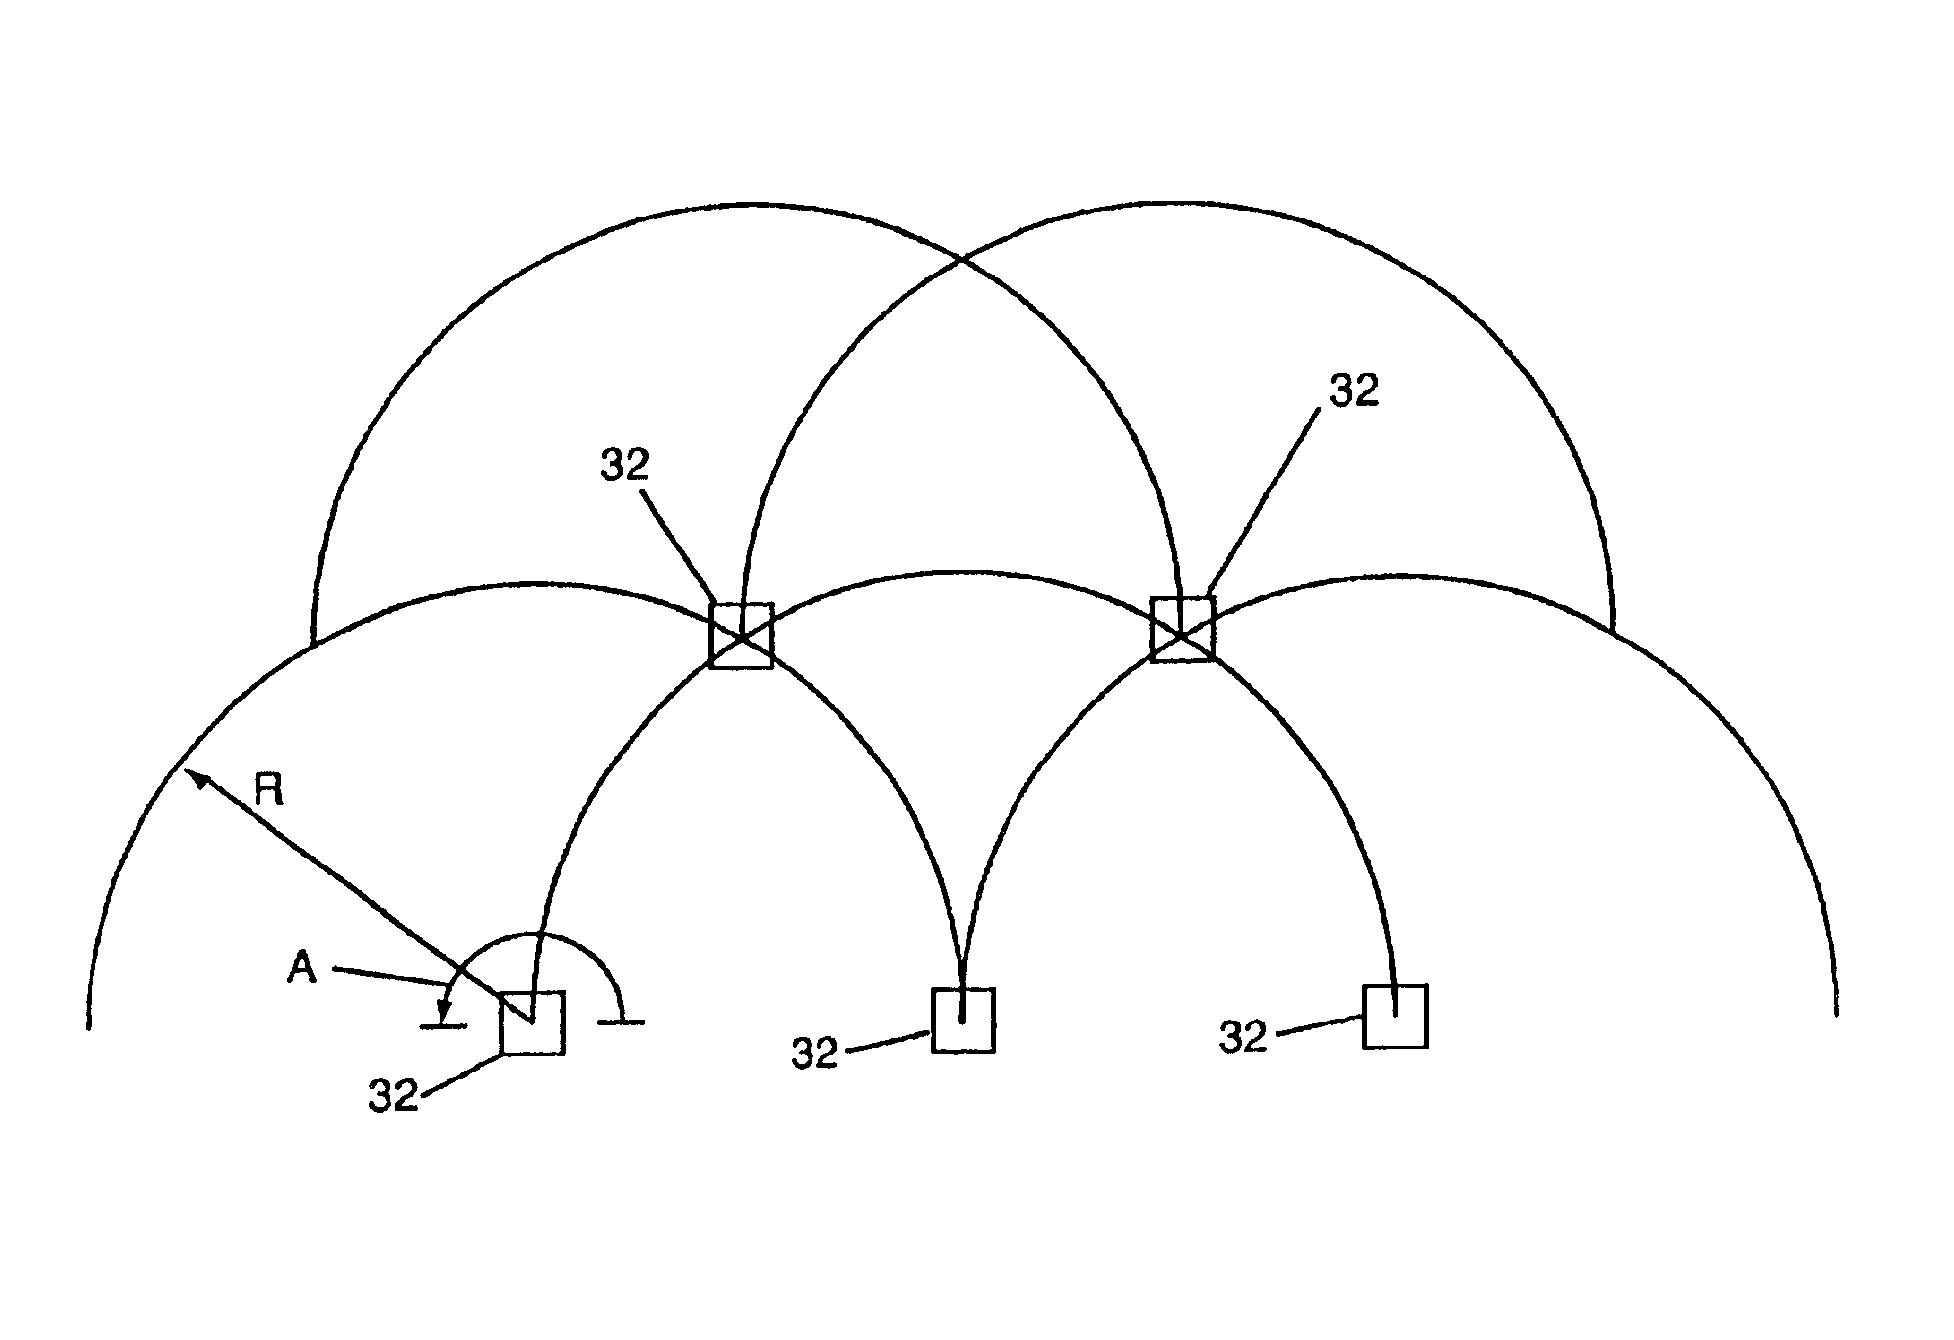 Apparatus and method for transmitting terrestrial signals on a common frequency with satellite transmissions